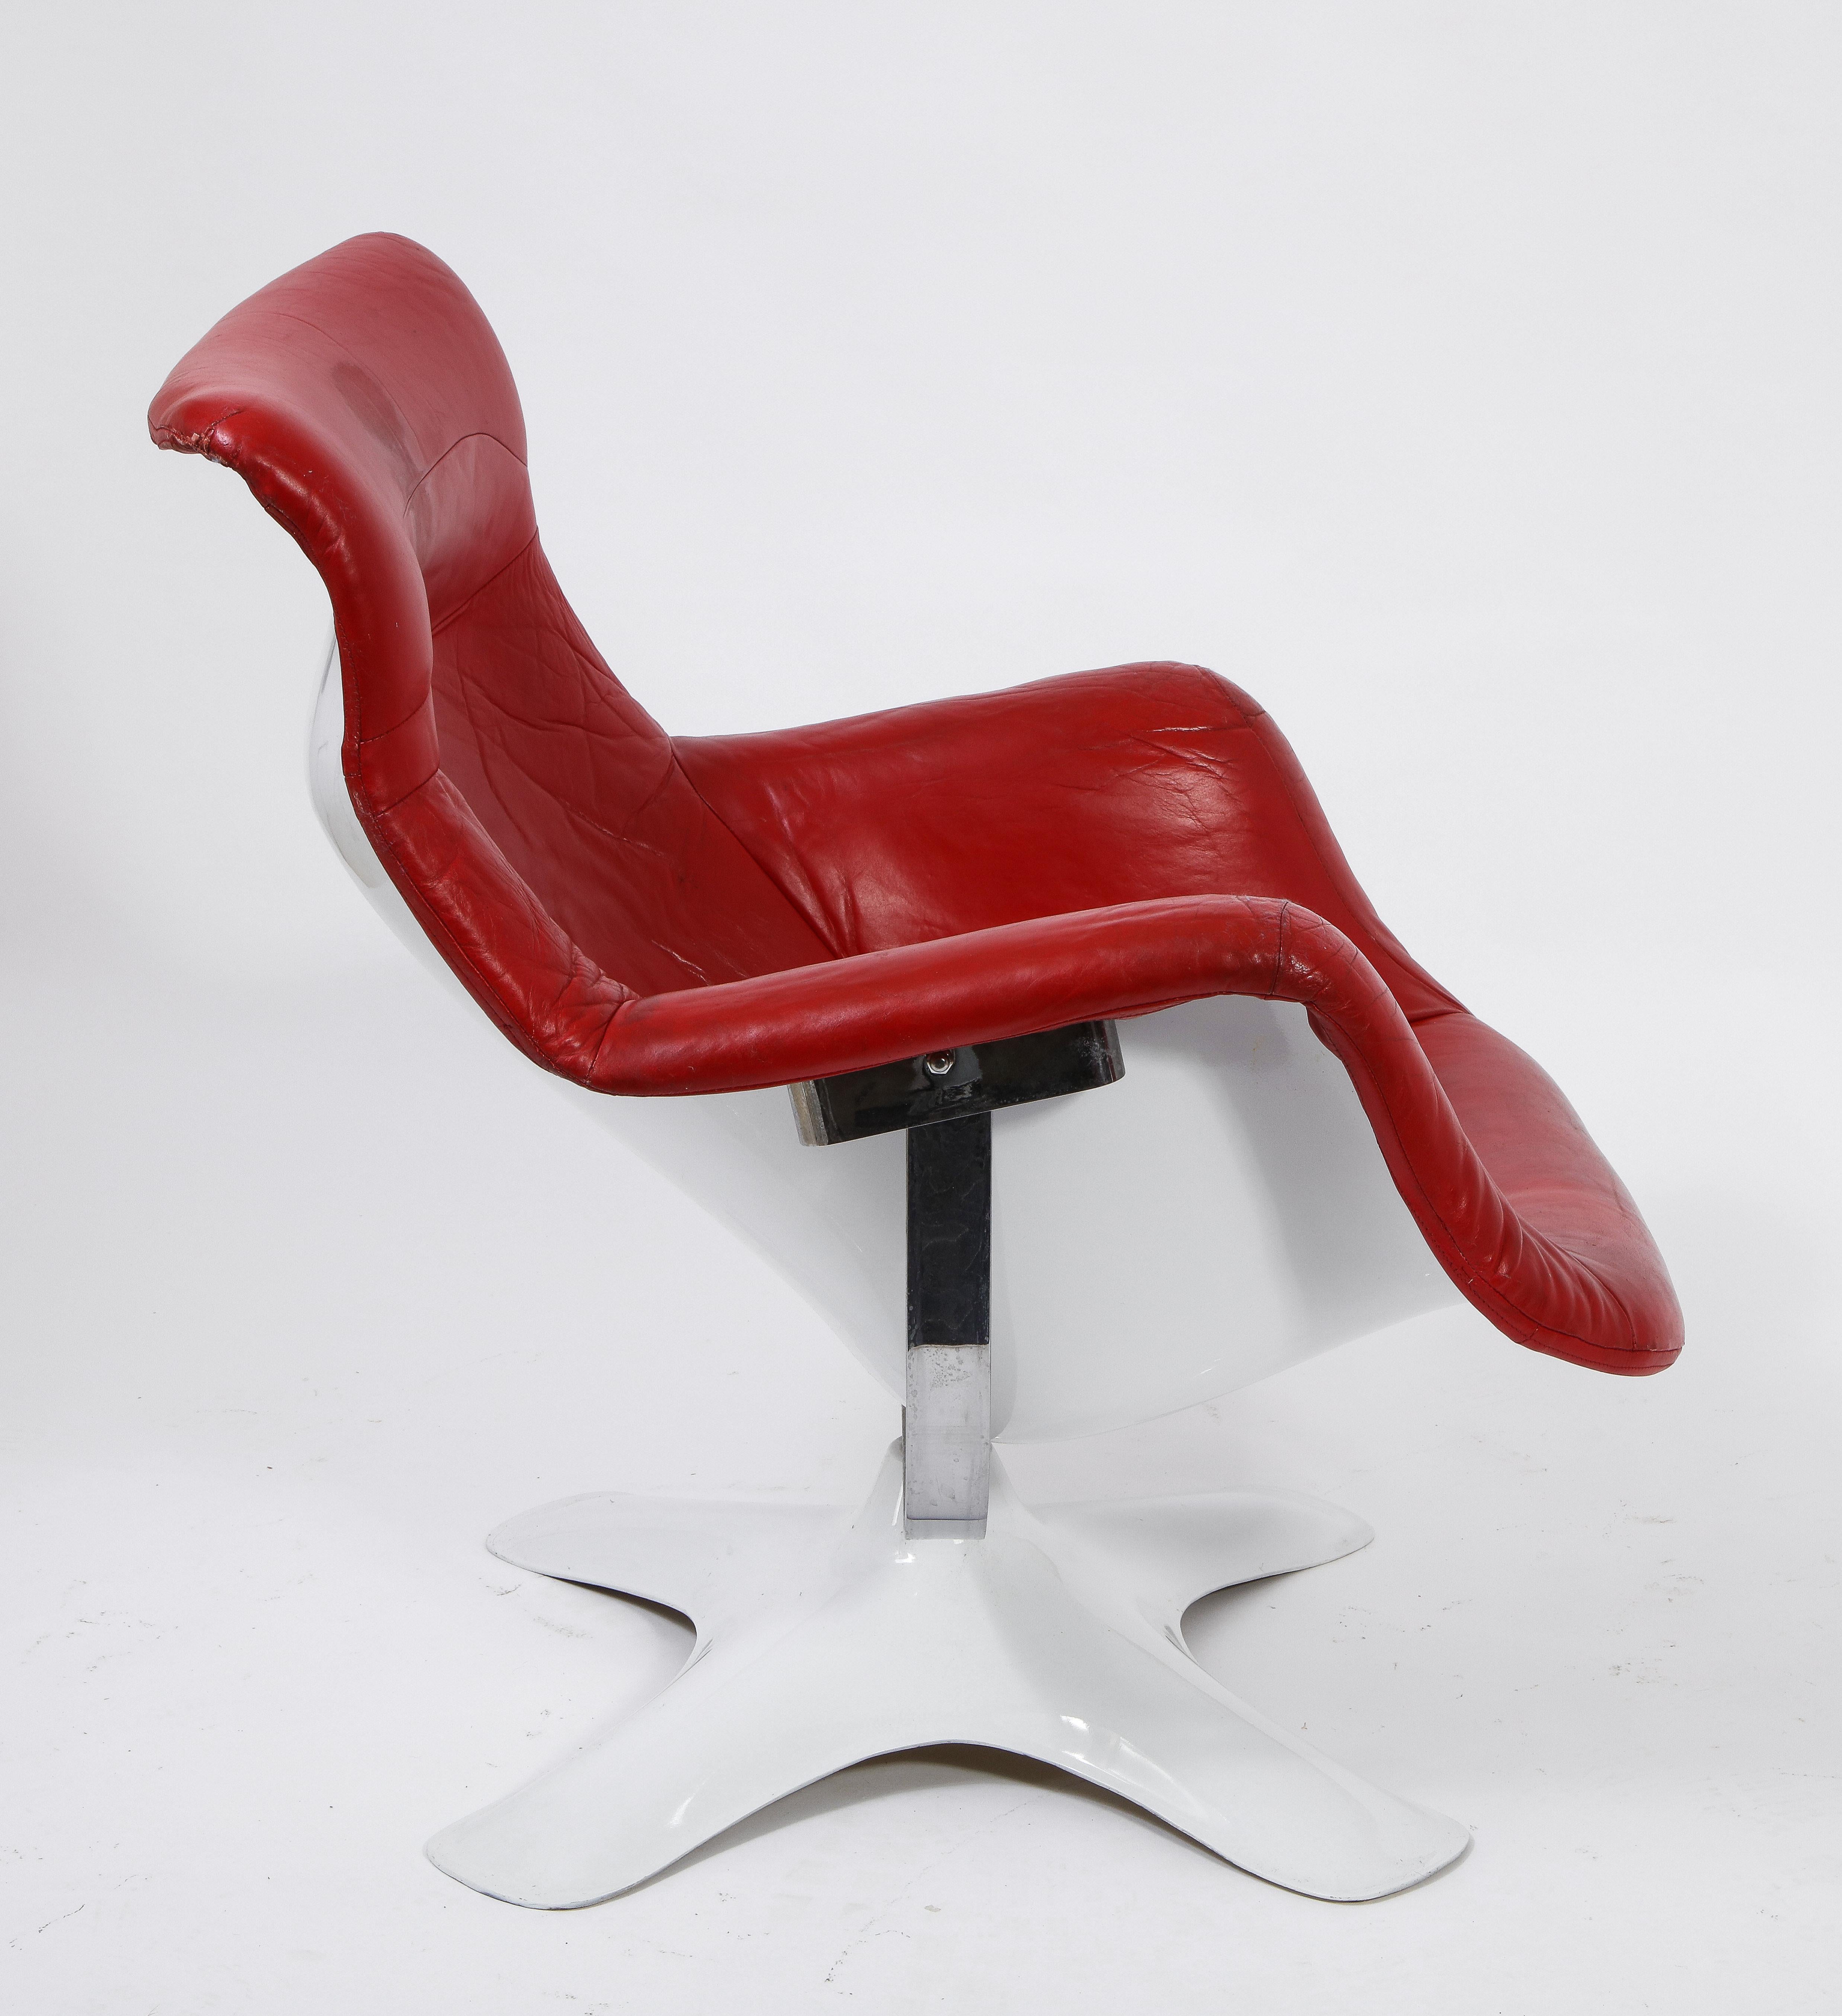 The Karuselli chair is Kukkapuro's crowning achievement. It is arguably among the most comfortable chair designs in existence. 

This example comes with the rare factory original red leather upholstery. Rarer still, the matching ottoman is also